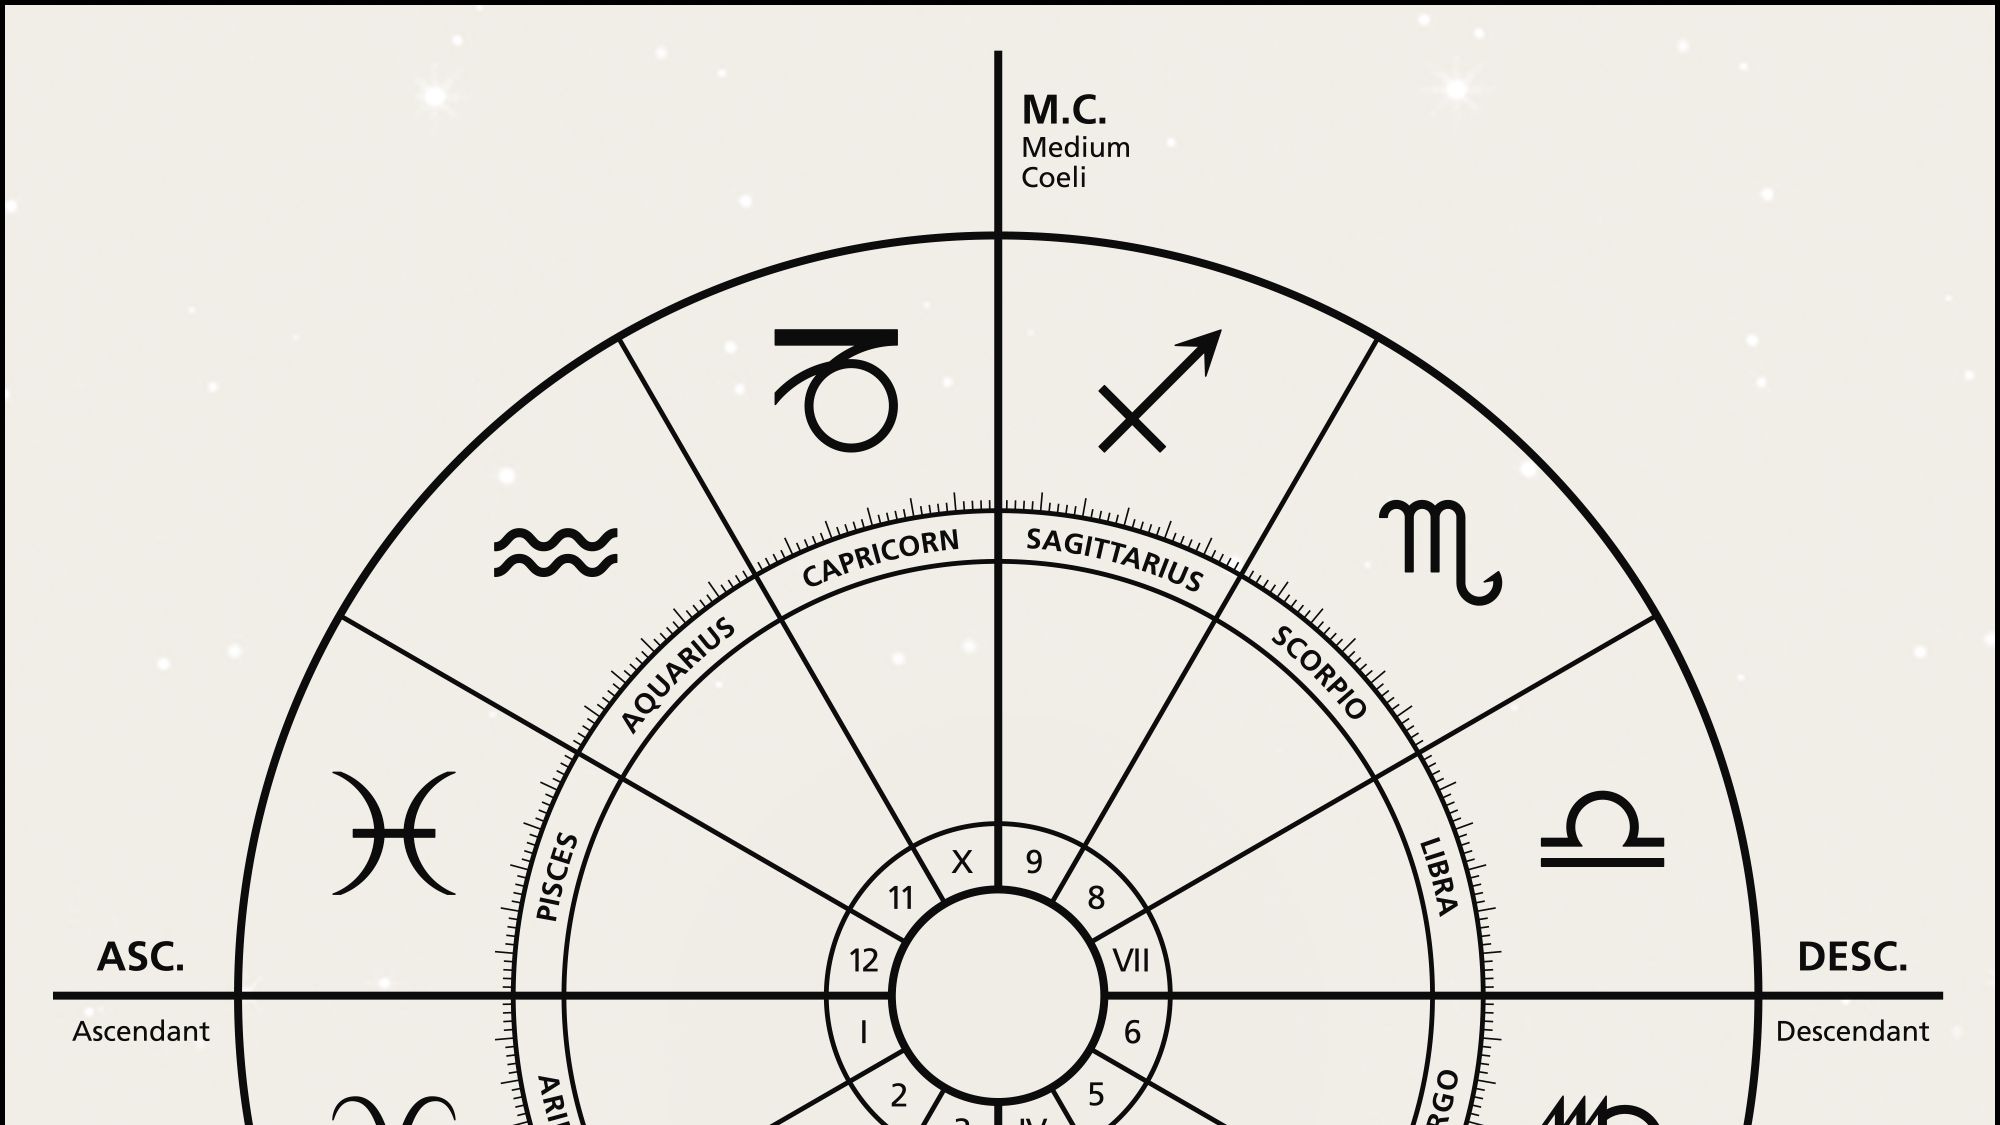 Top 6 Most Free-Spirited Zodiac Signs According To Astrology